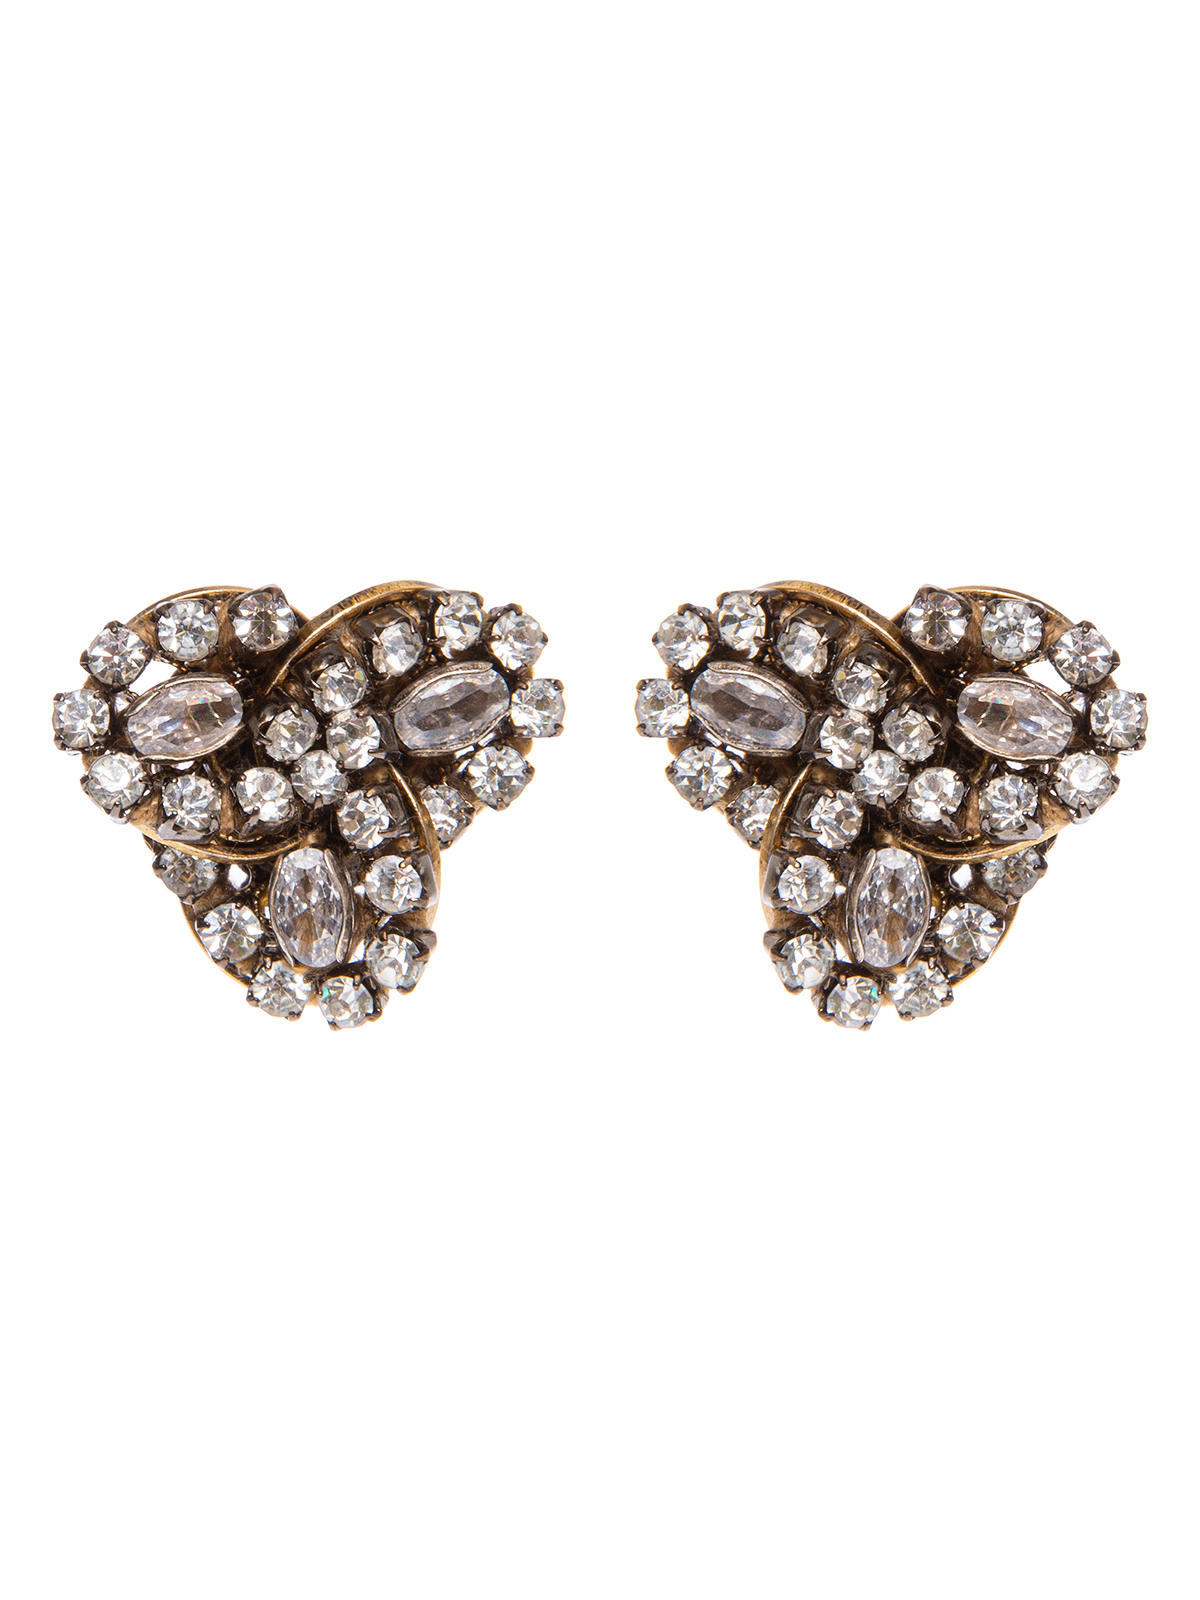 Earrings with crystal petals